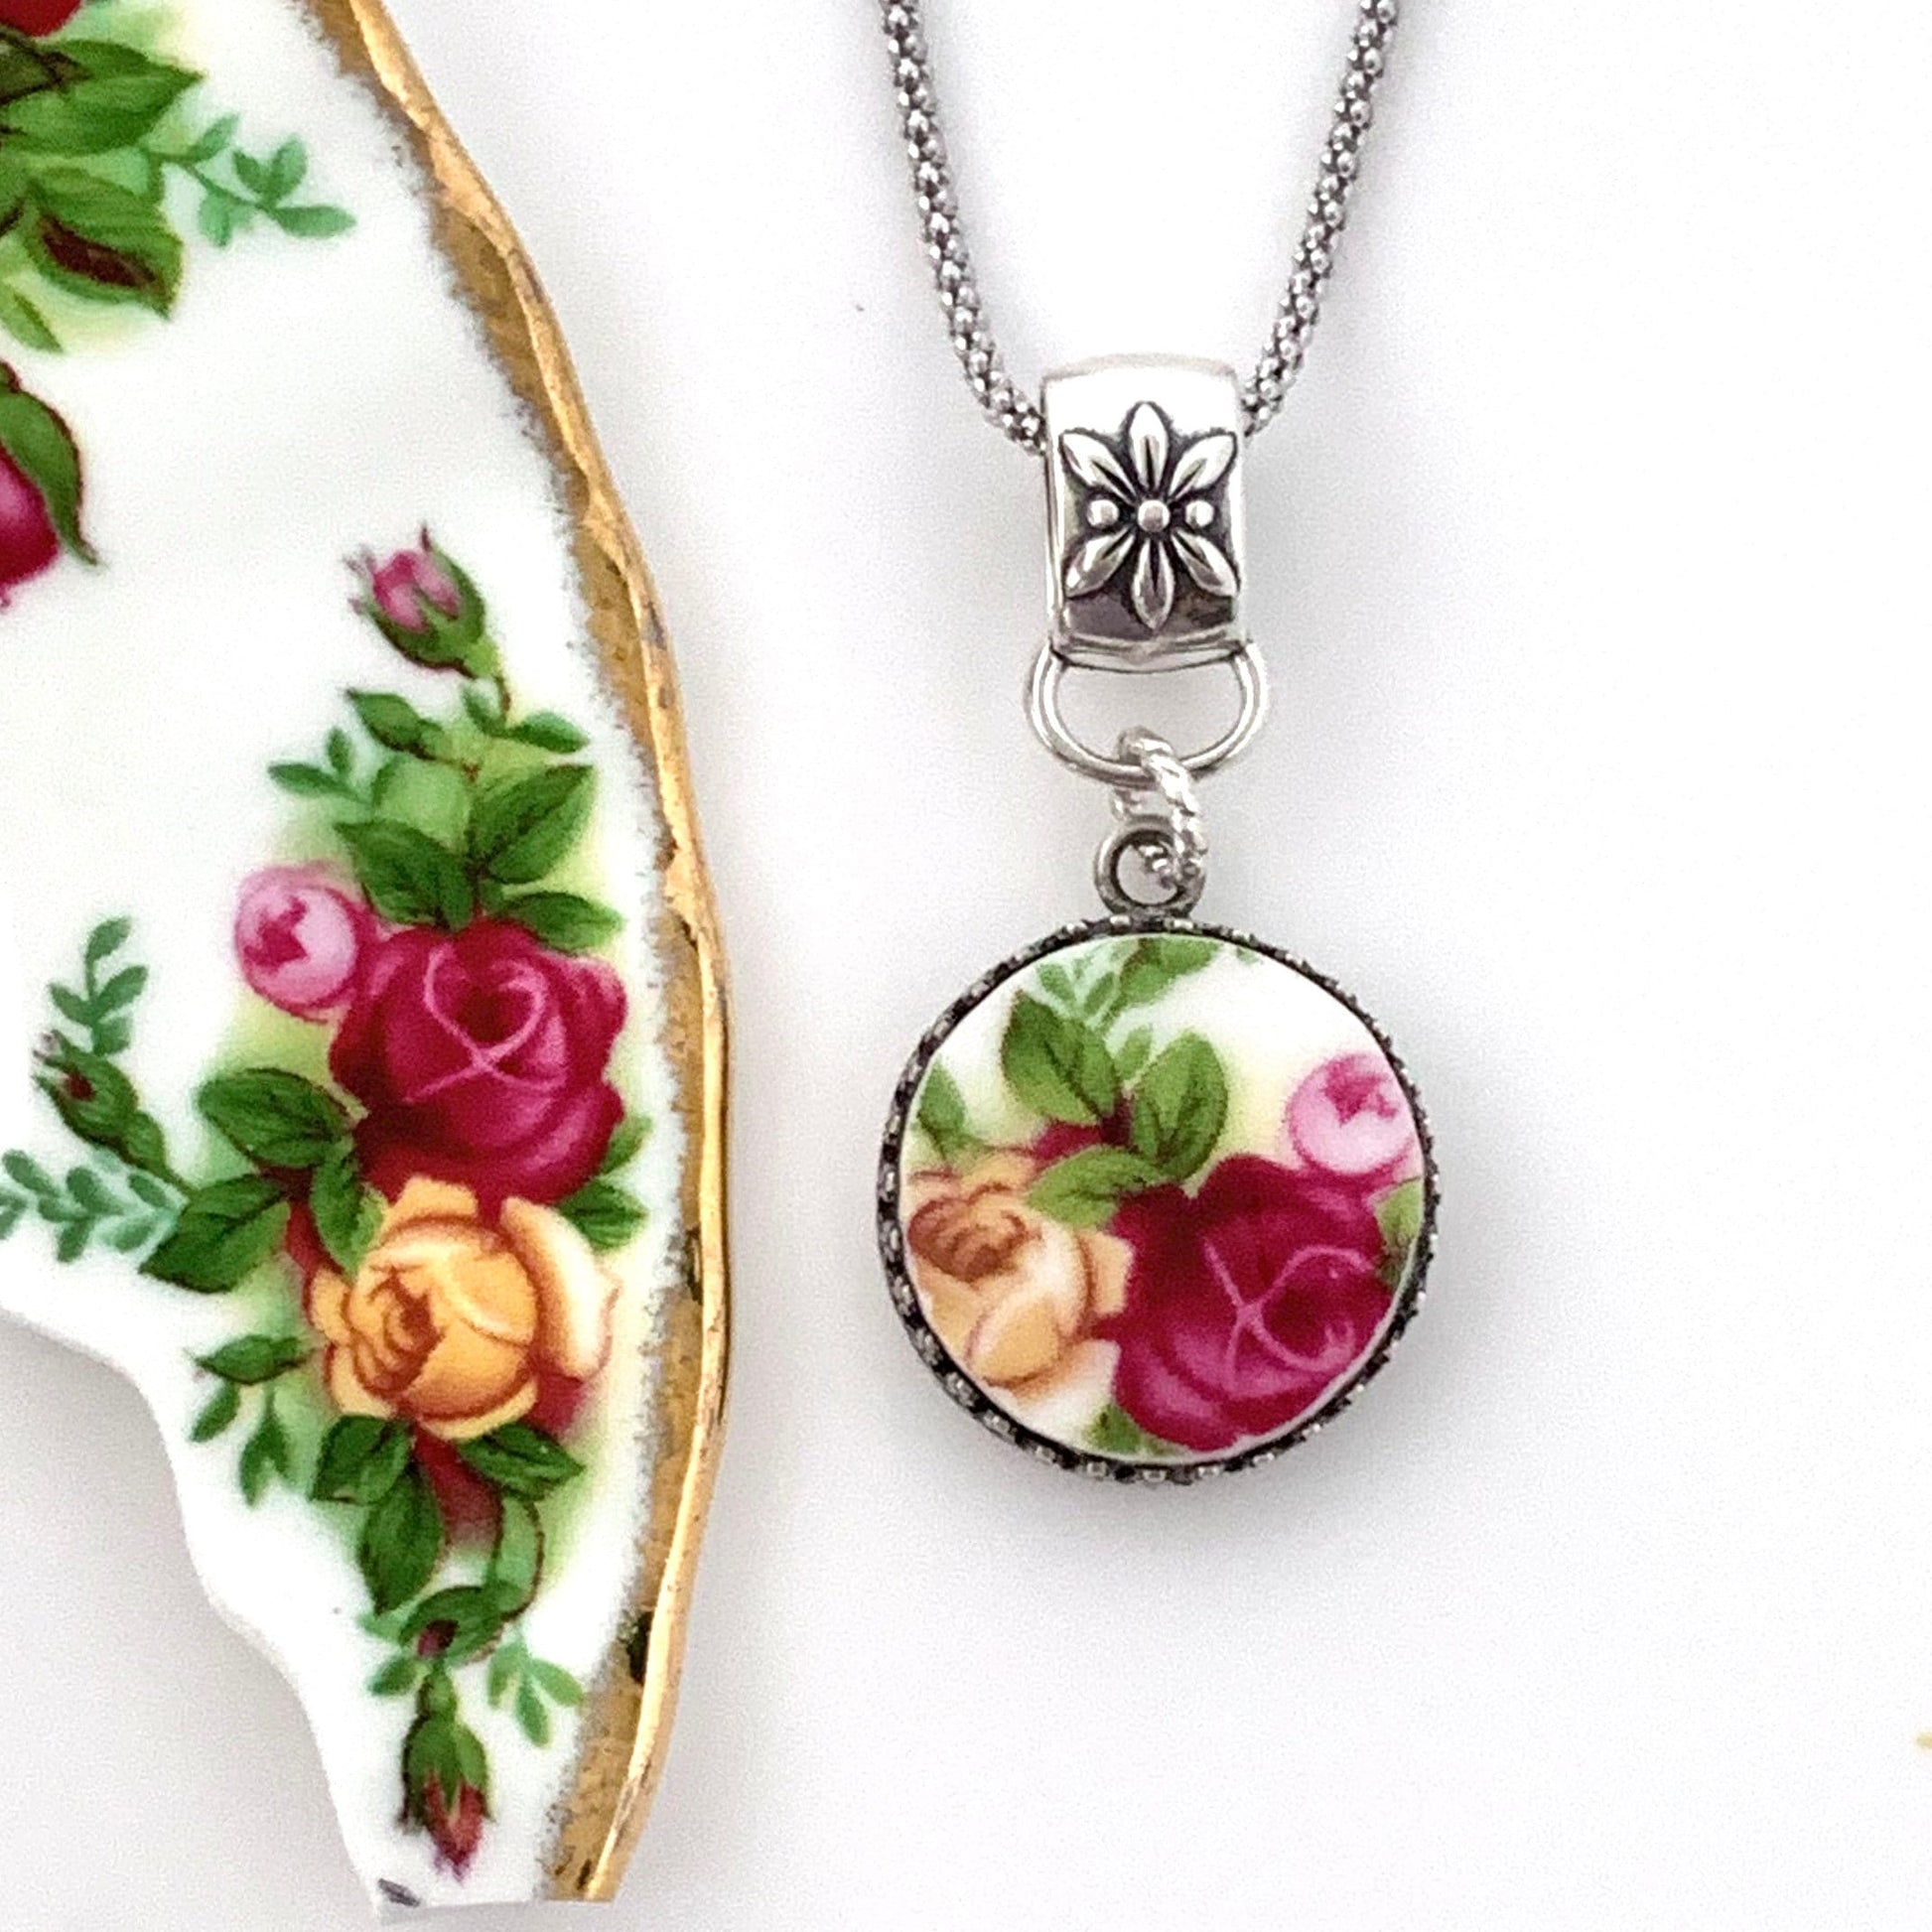 Royal Albert Old Country Roses China Jewelry Set, 20th Anniversary Gift for Wife, Red Rose China Necklace, Unique Gifts for Women